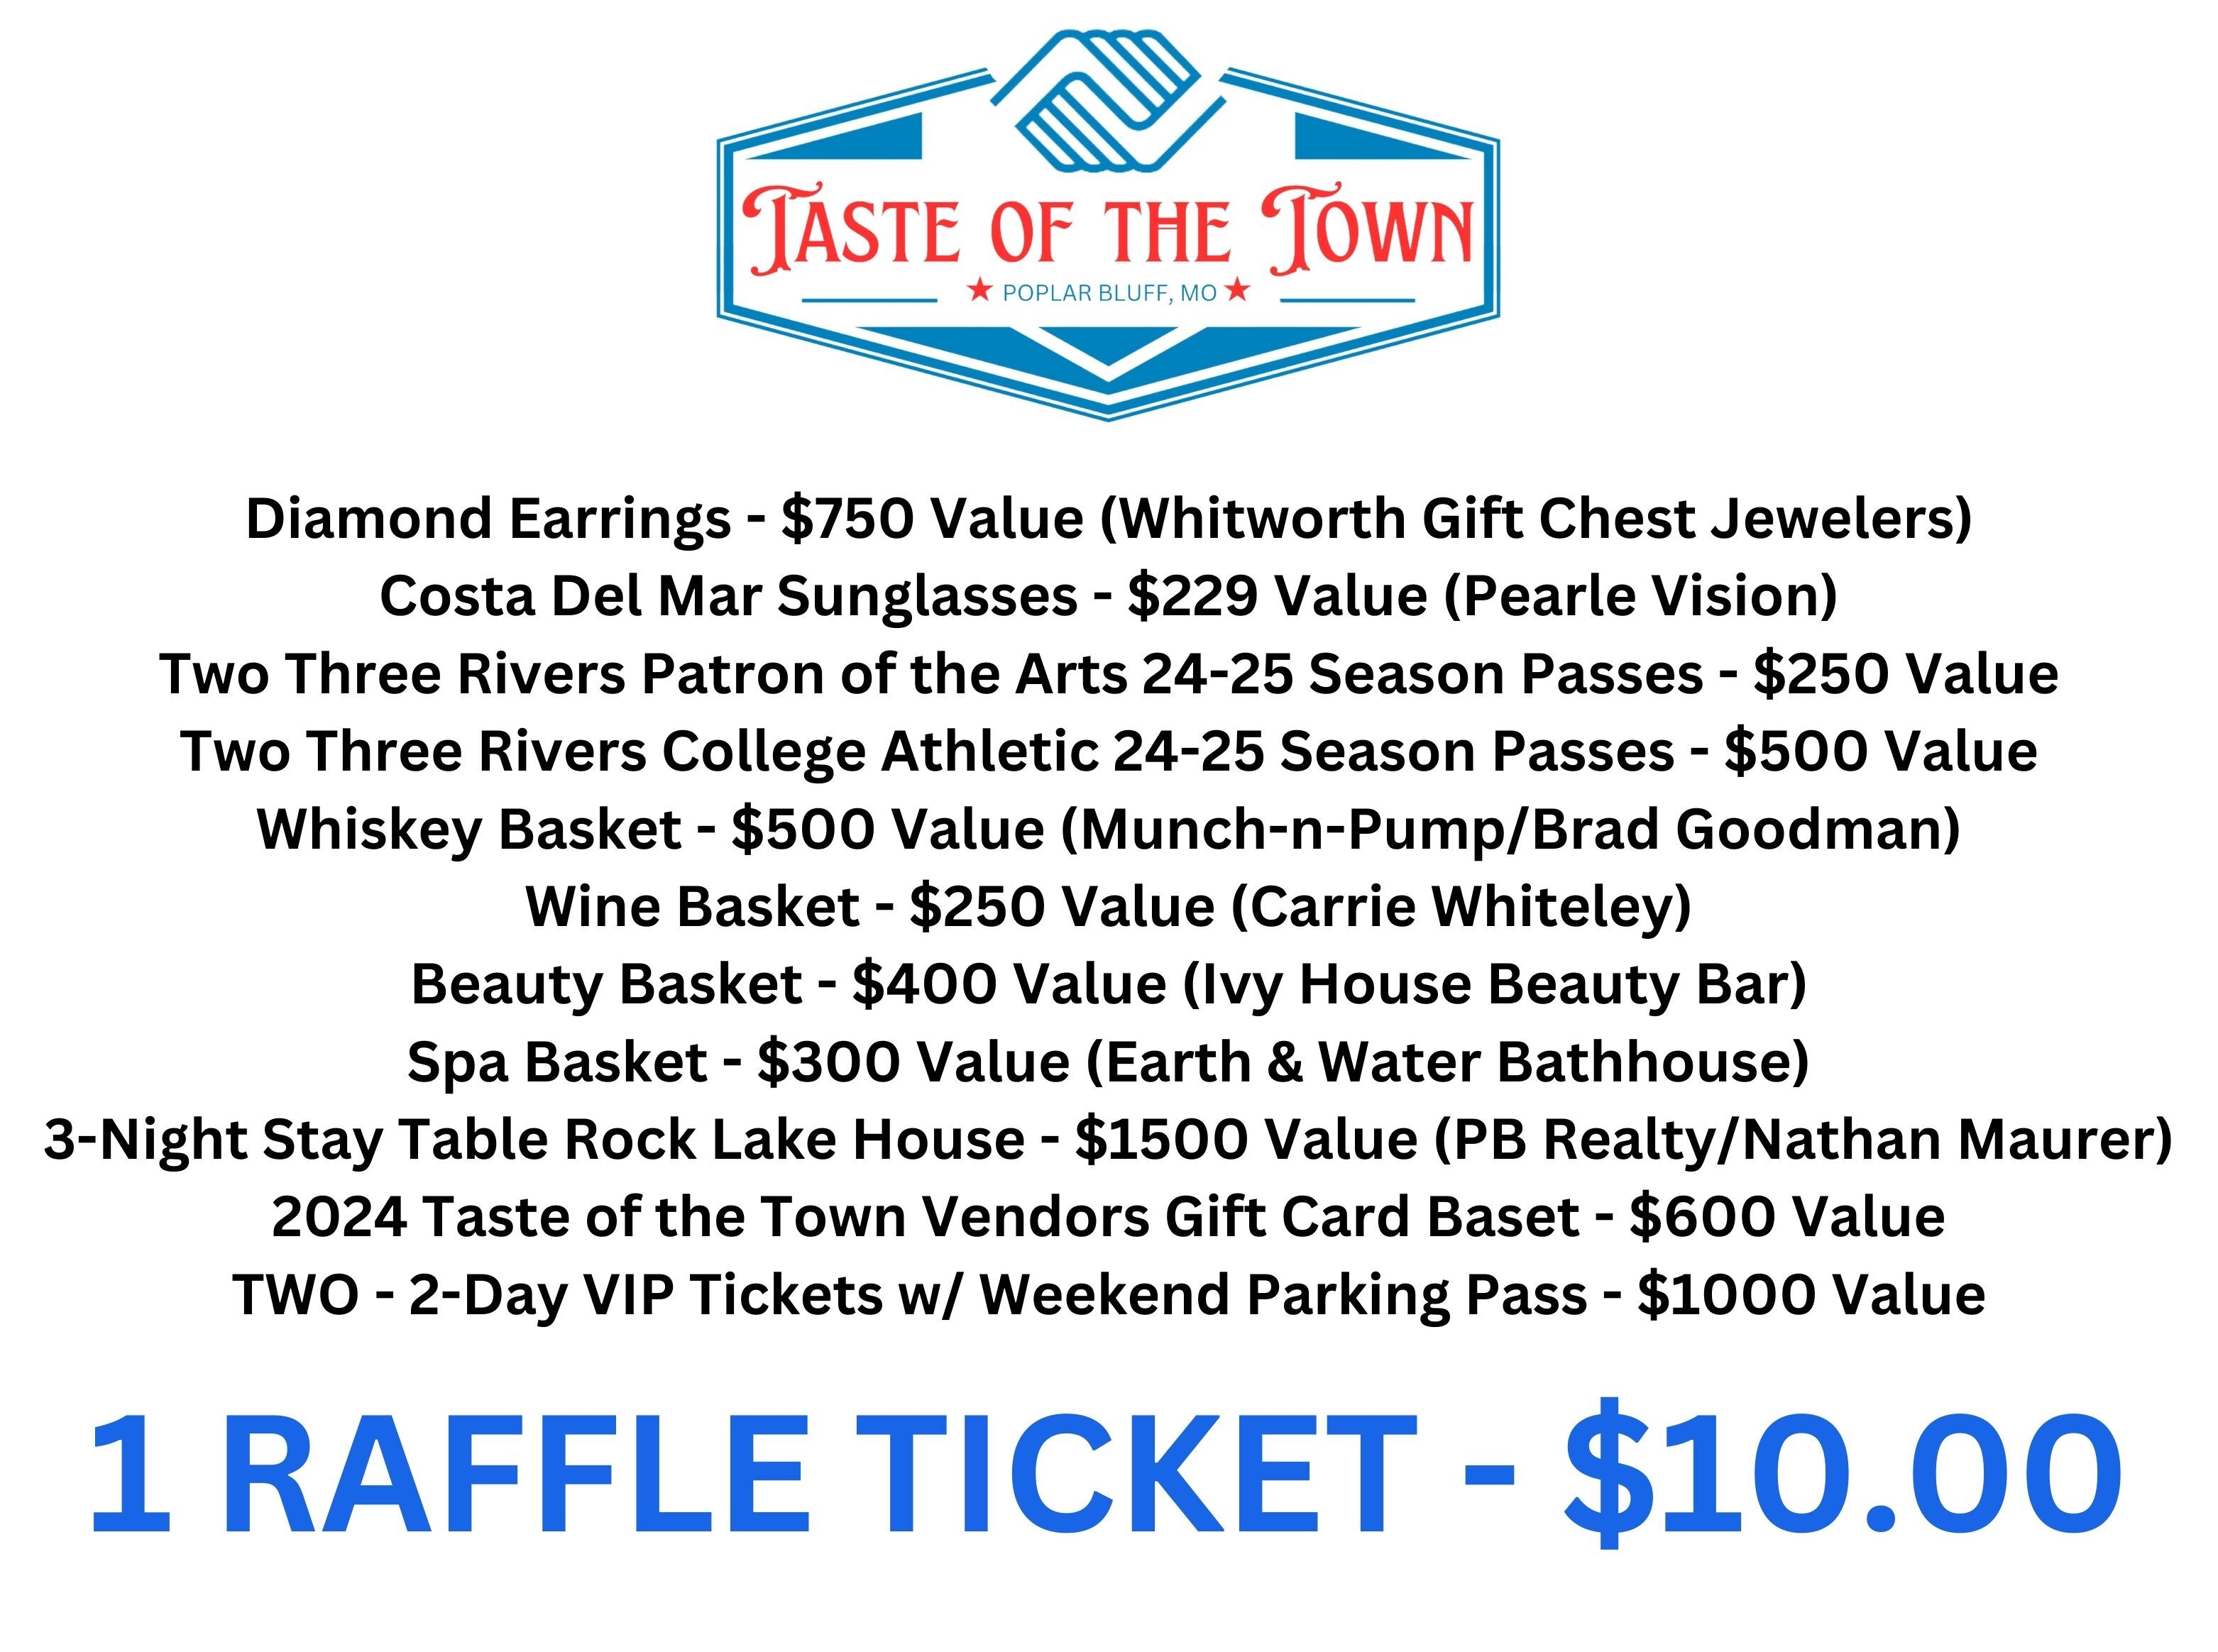 PURCHASE 1 RAFFLE TICKET HERE